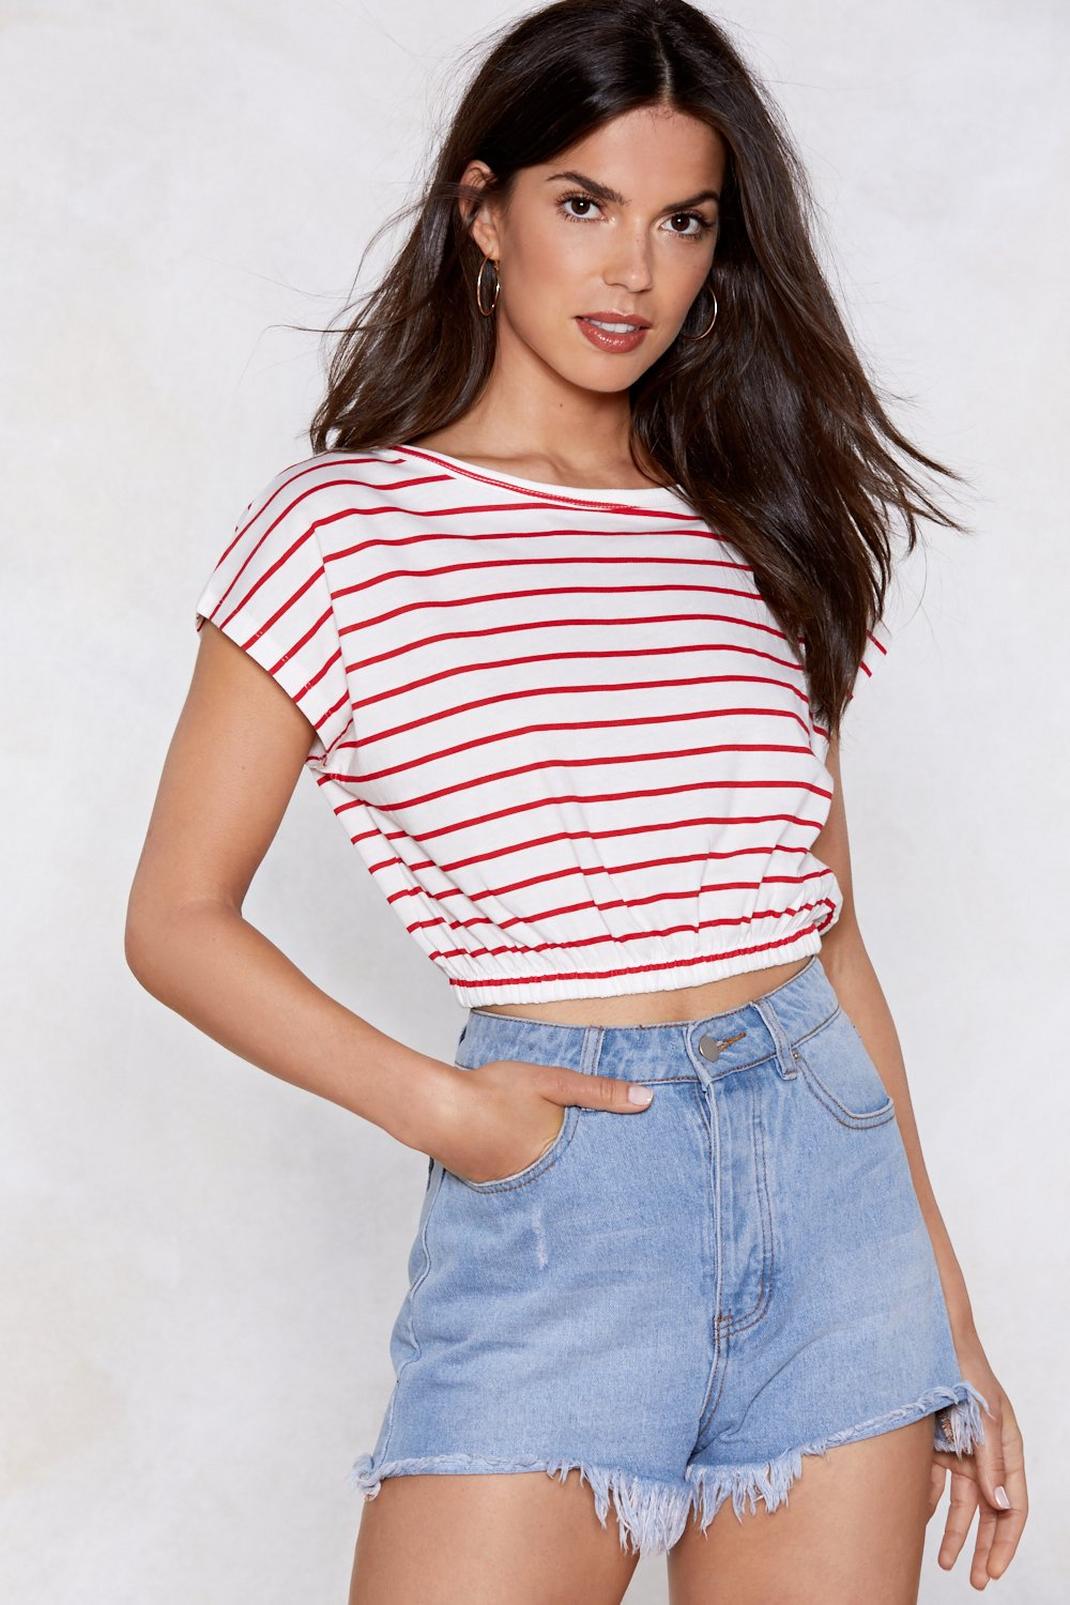 Set Your Priorities Straight Striped Cropped Tee image number 1